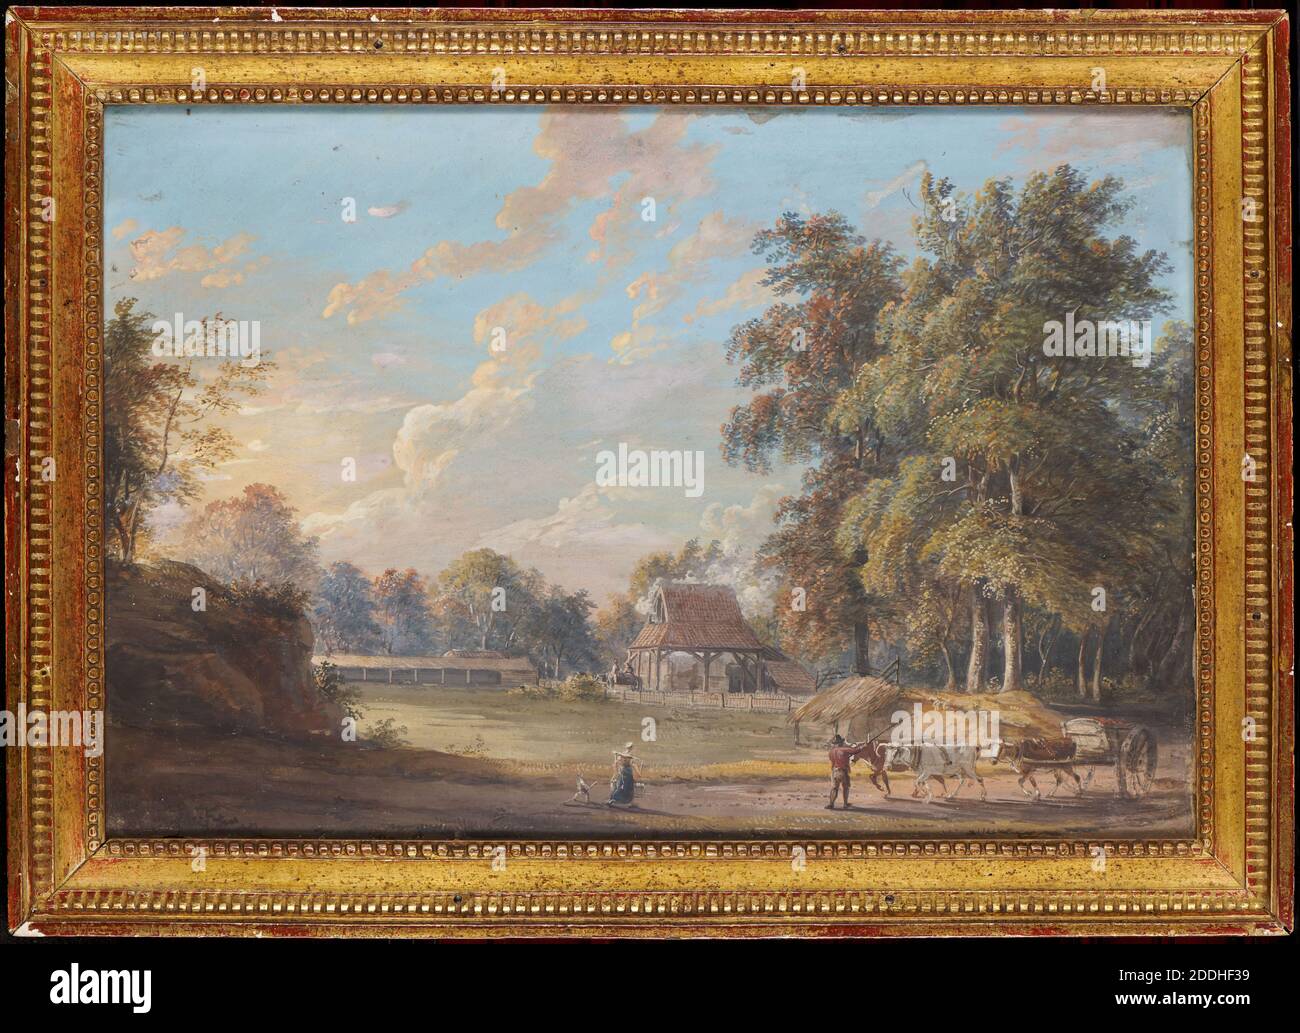 Scene In Worcestershire, c.1725-1809 Paul Sandby (d.1809), Landscape, 18th Century, England, English, Frame, Rural, Animal, Cow, Countryside, Agriculture, Farming, England, Worcestershire, Works on Paper Stock Photo